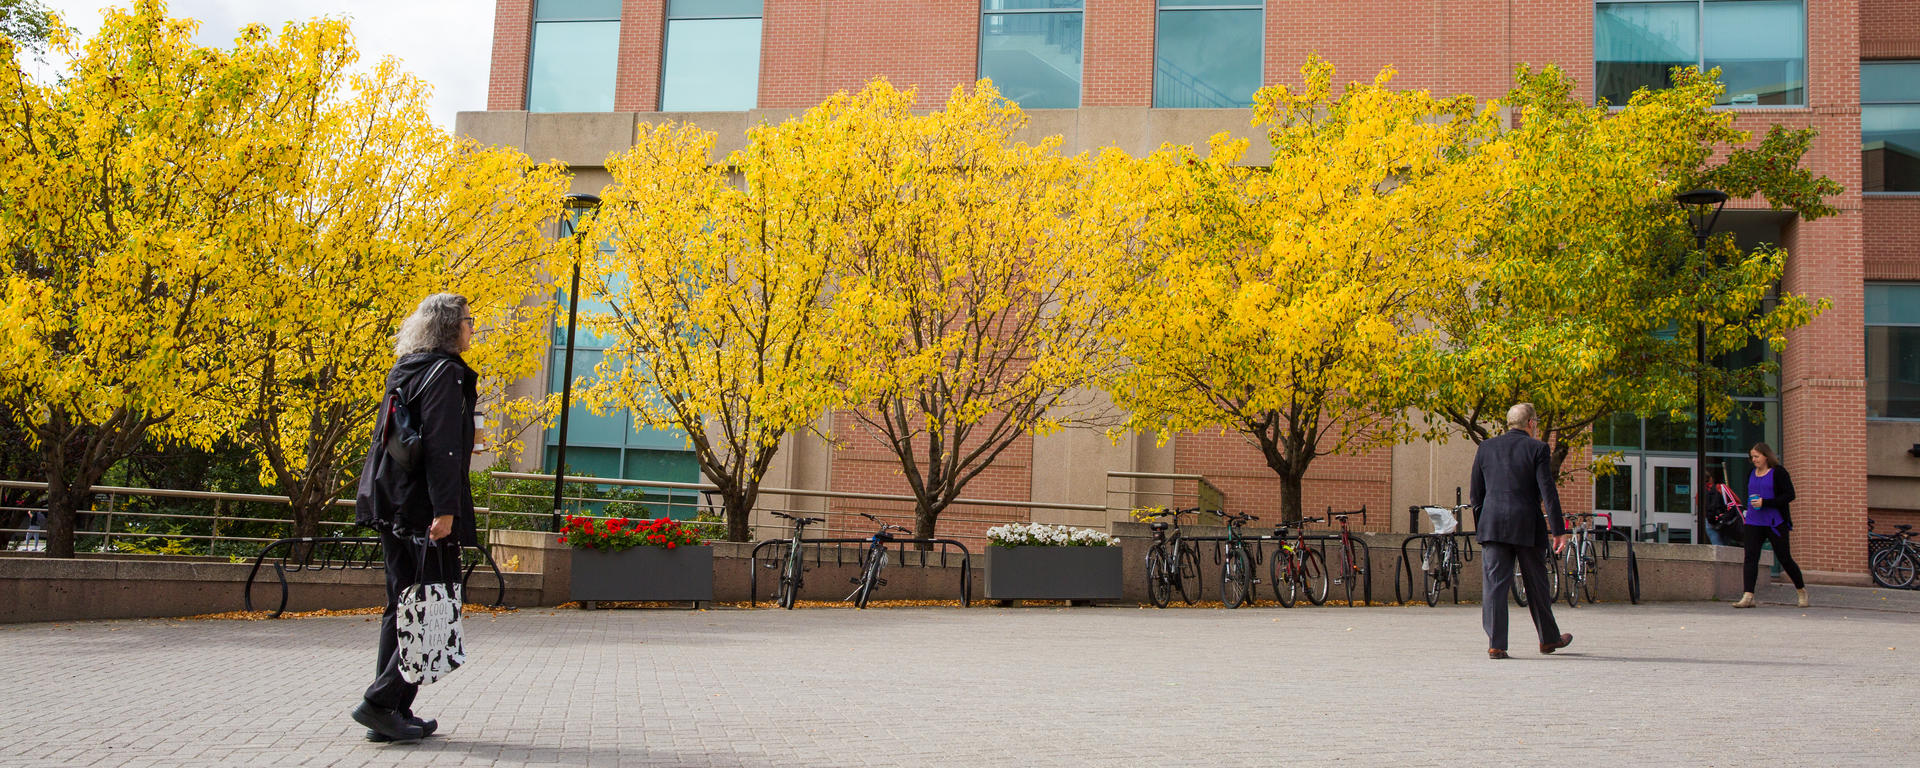 An exterior shot of Murray Fraser Hall, home of the Faculty of Law on a sunny fall day.